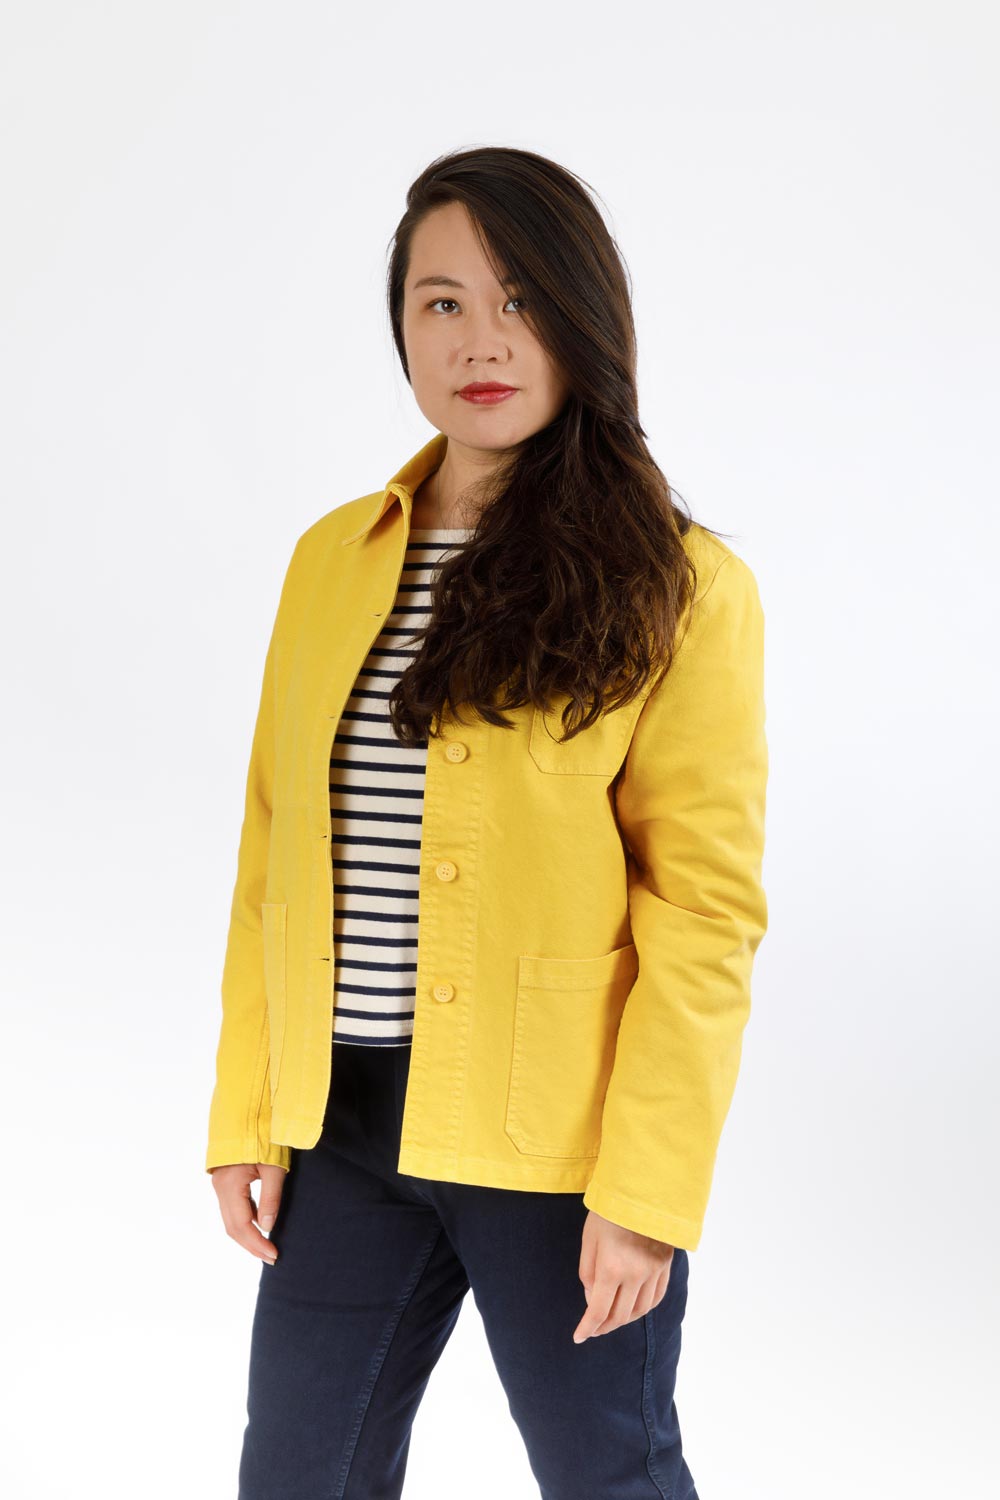 French woman workwear jacket 4F in organic cotton